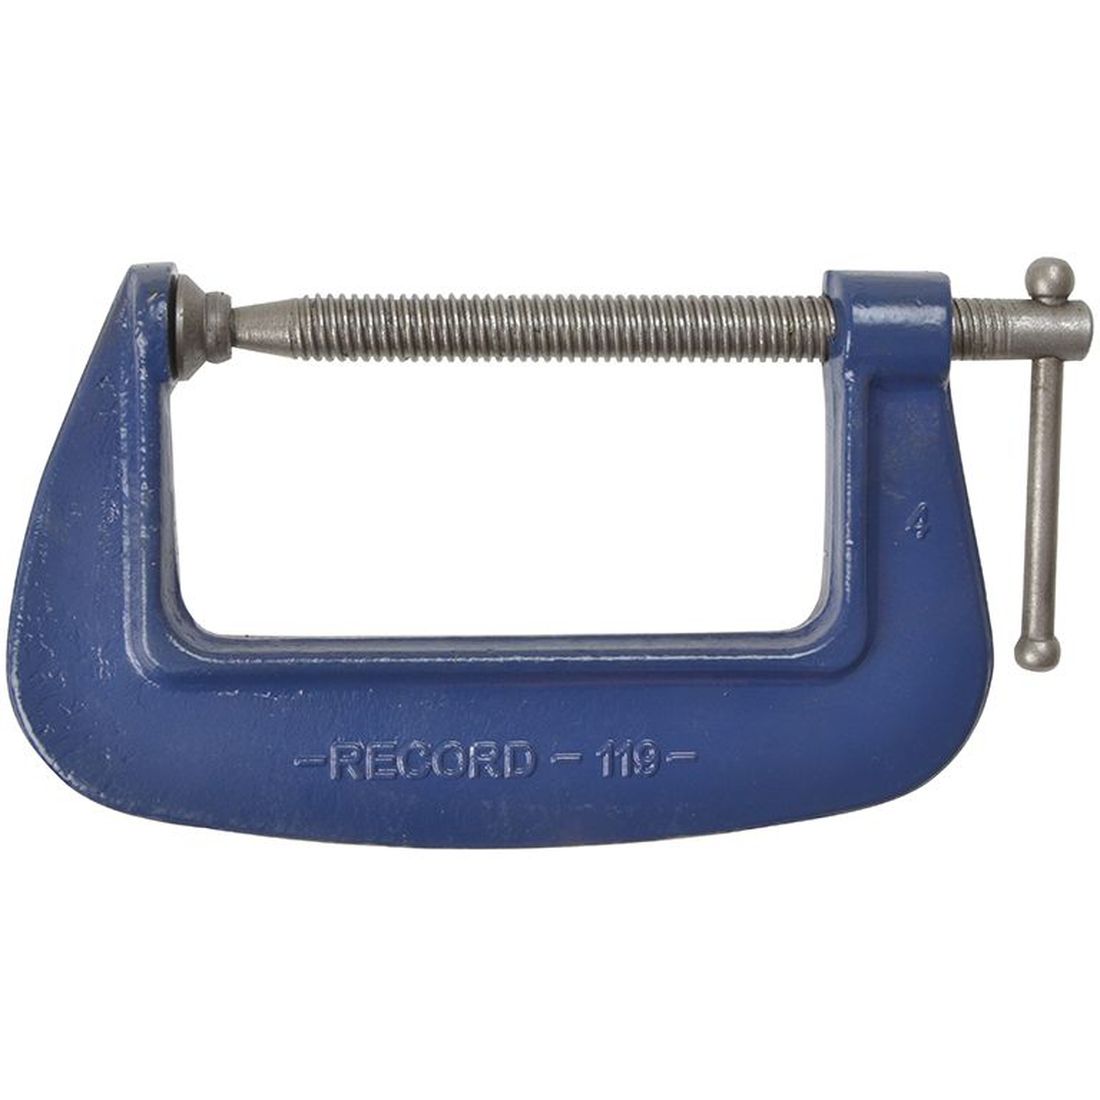 IRWIN 119 Medium-Duty Forged G-Clamp 100mm (4in)                                      